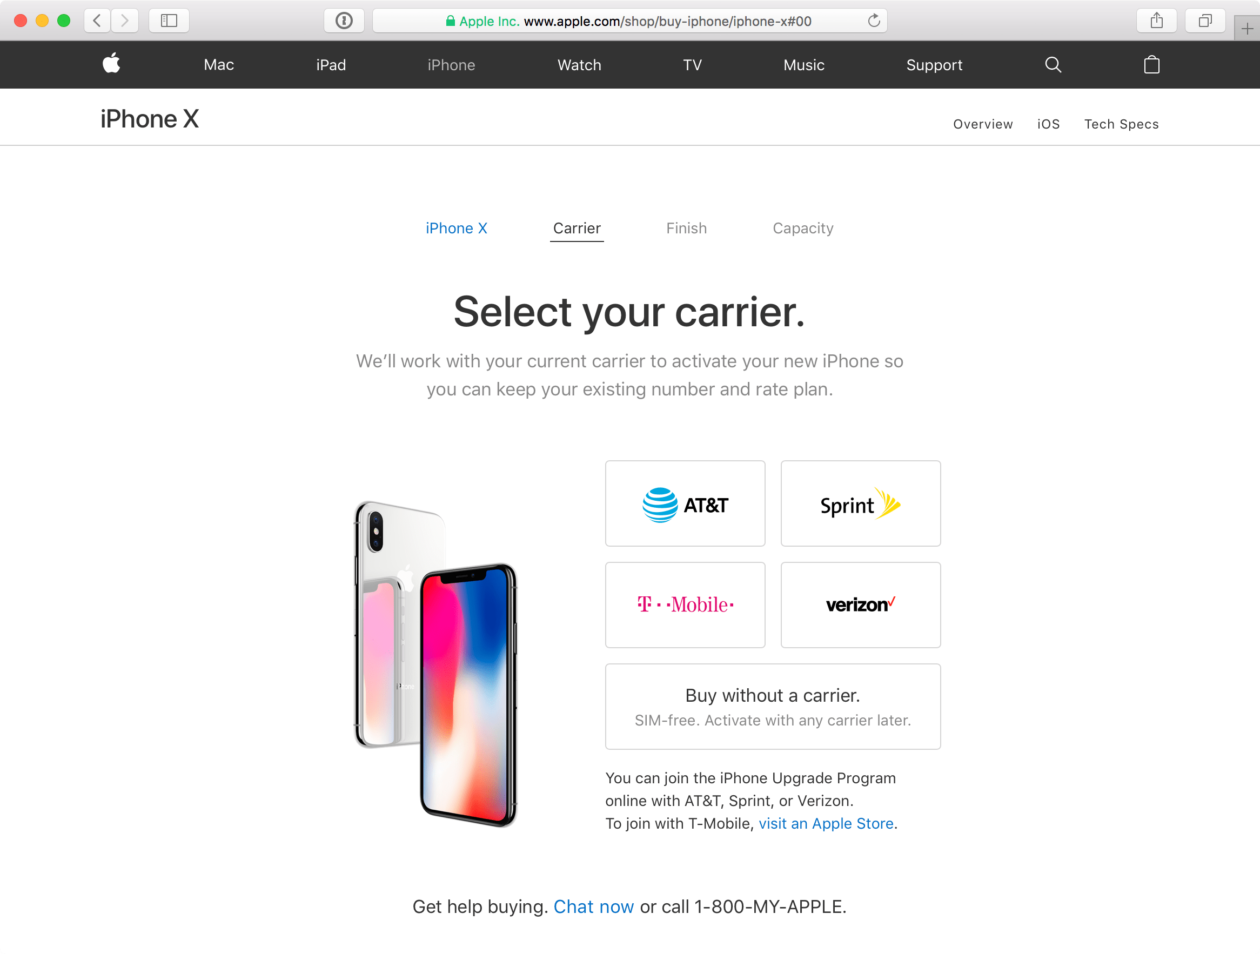 Apple starts selling SIM-free iPhone X models in the United States